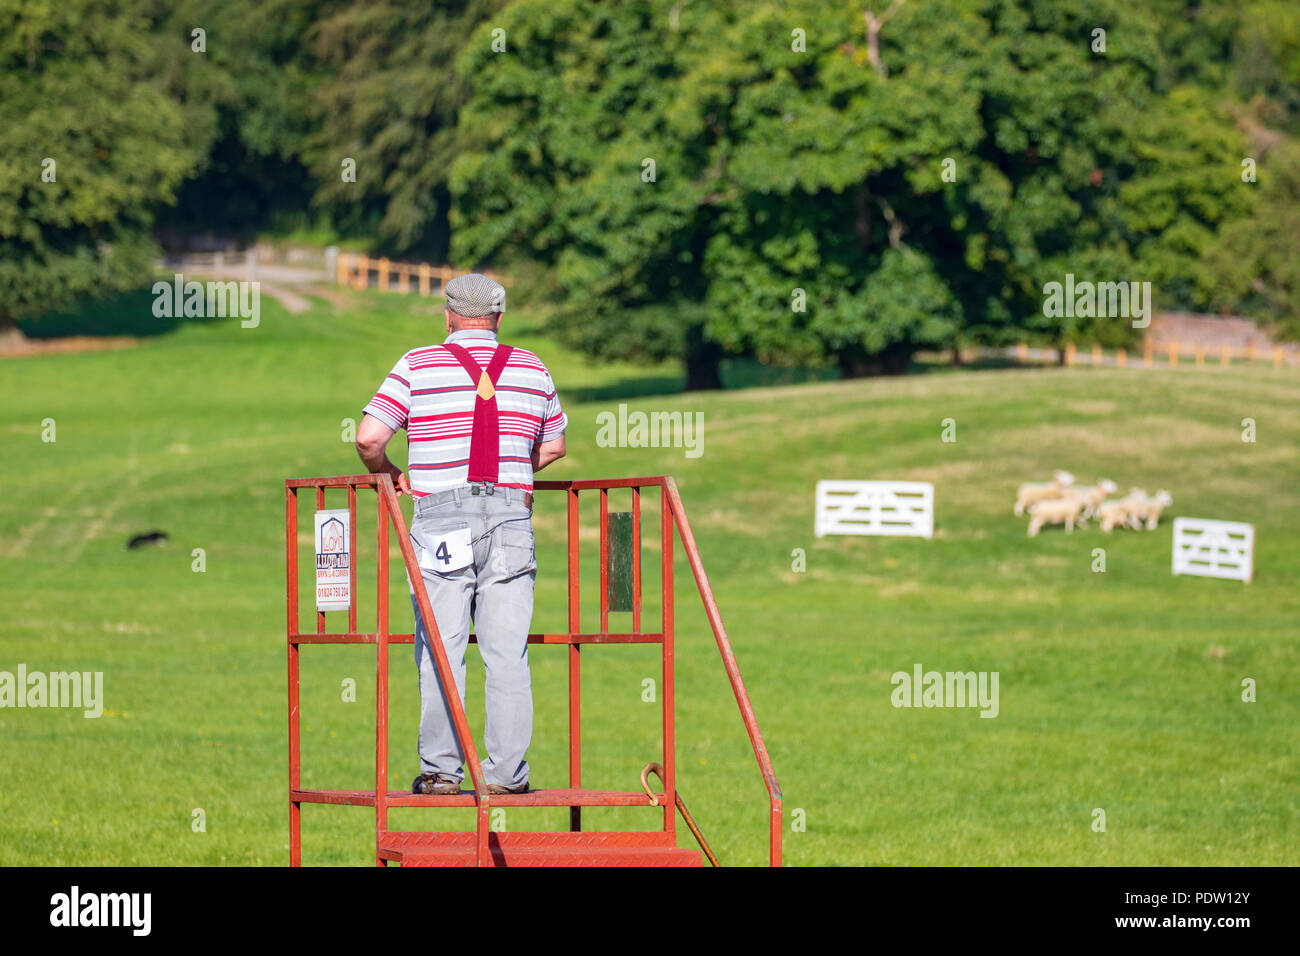 A sheep herder commaning his sheep dog during the National sheep dog trials in Nannerch Stock Photo